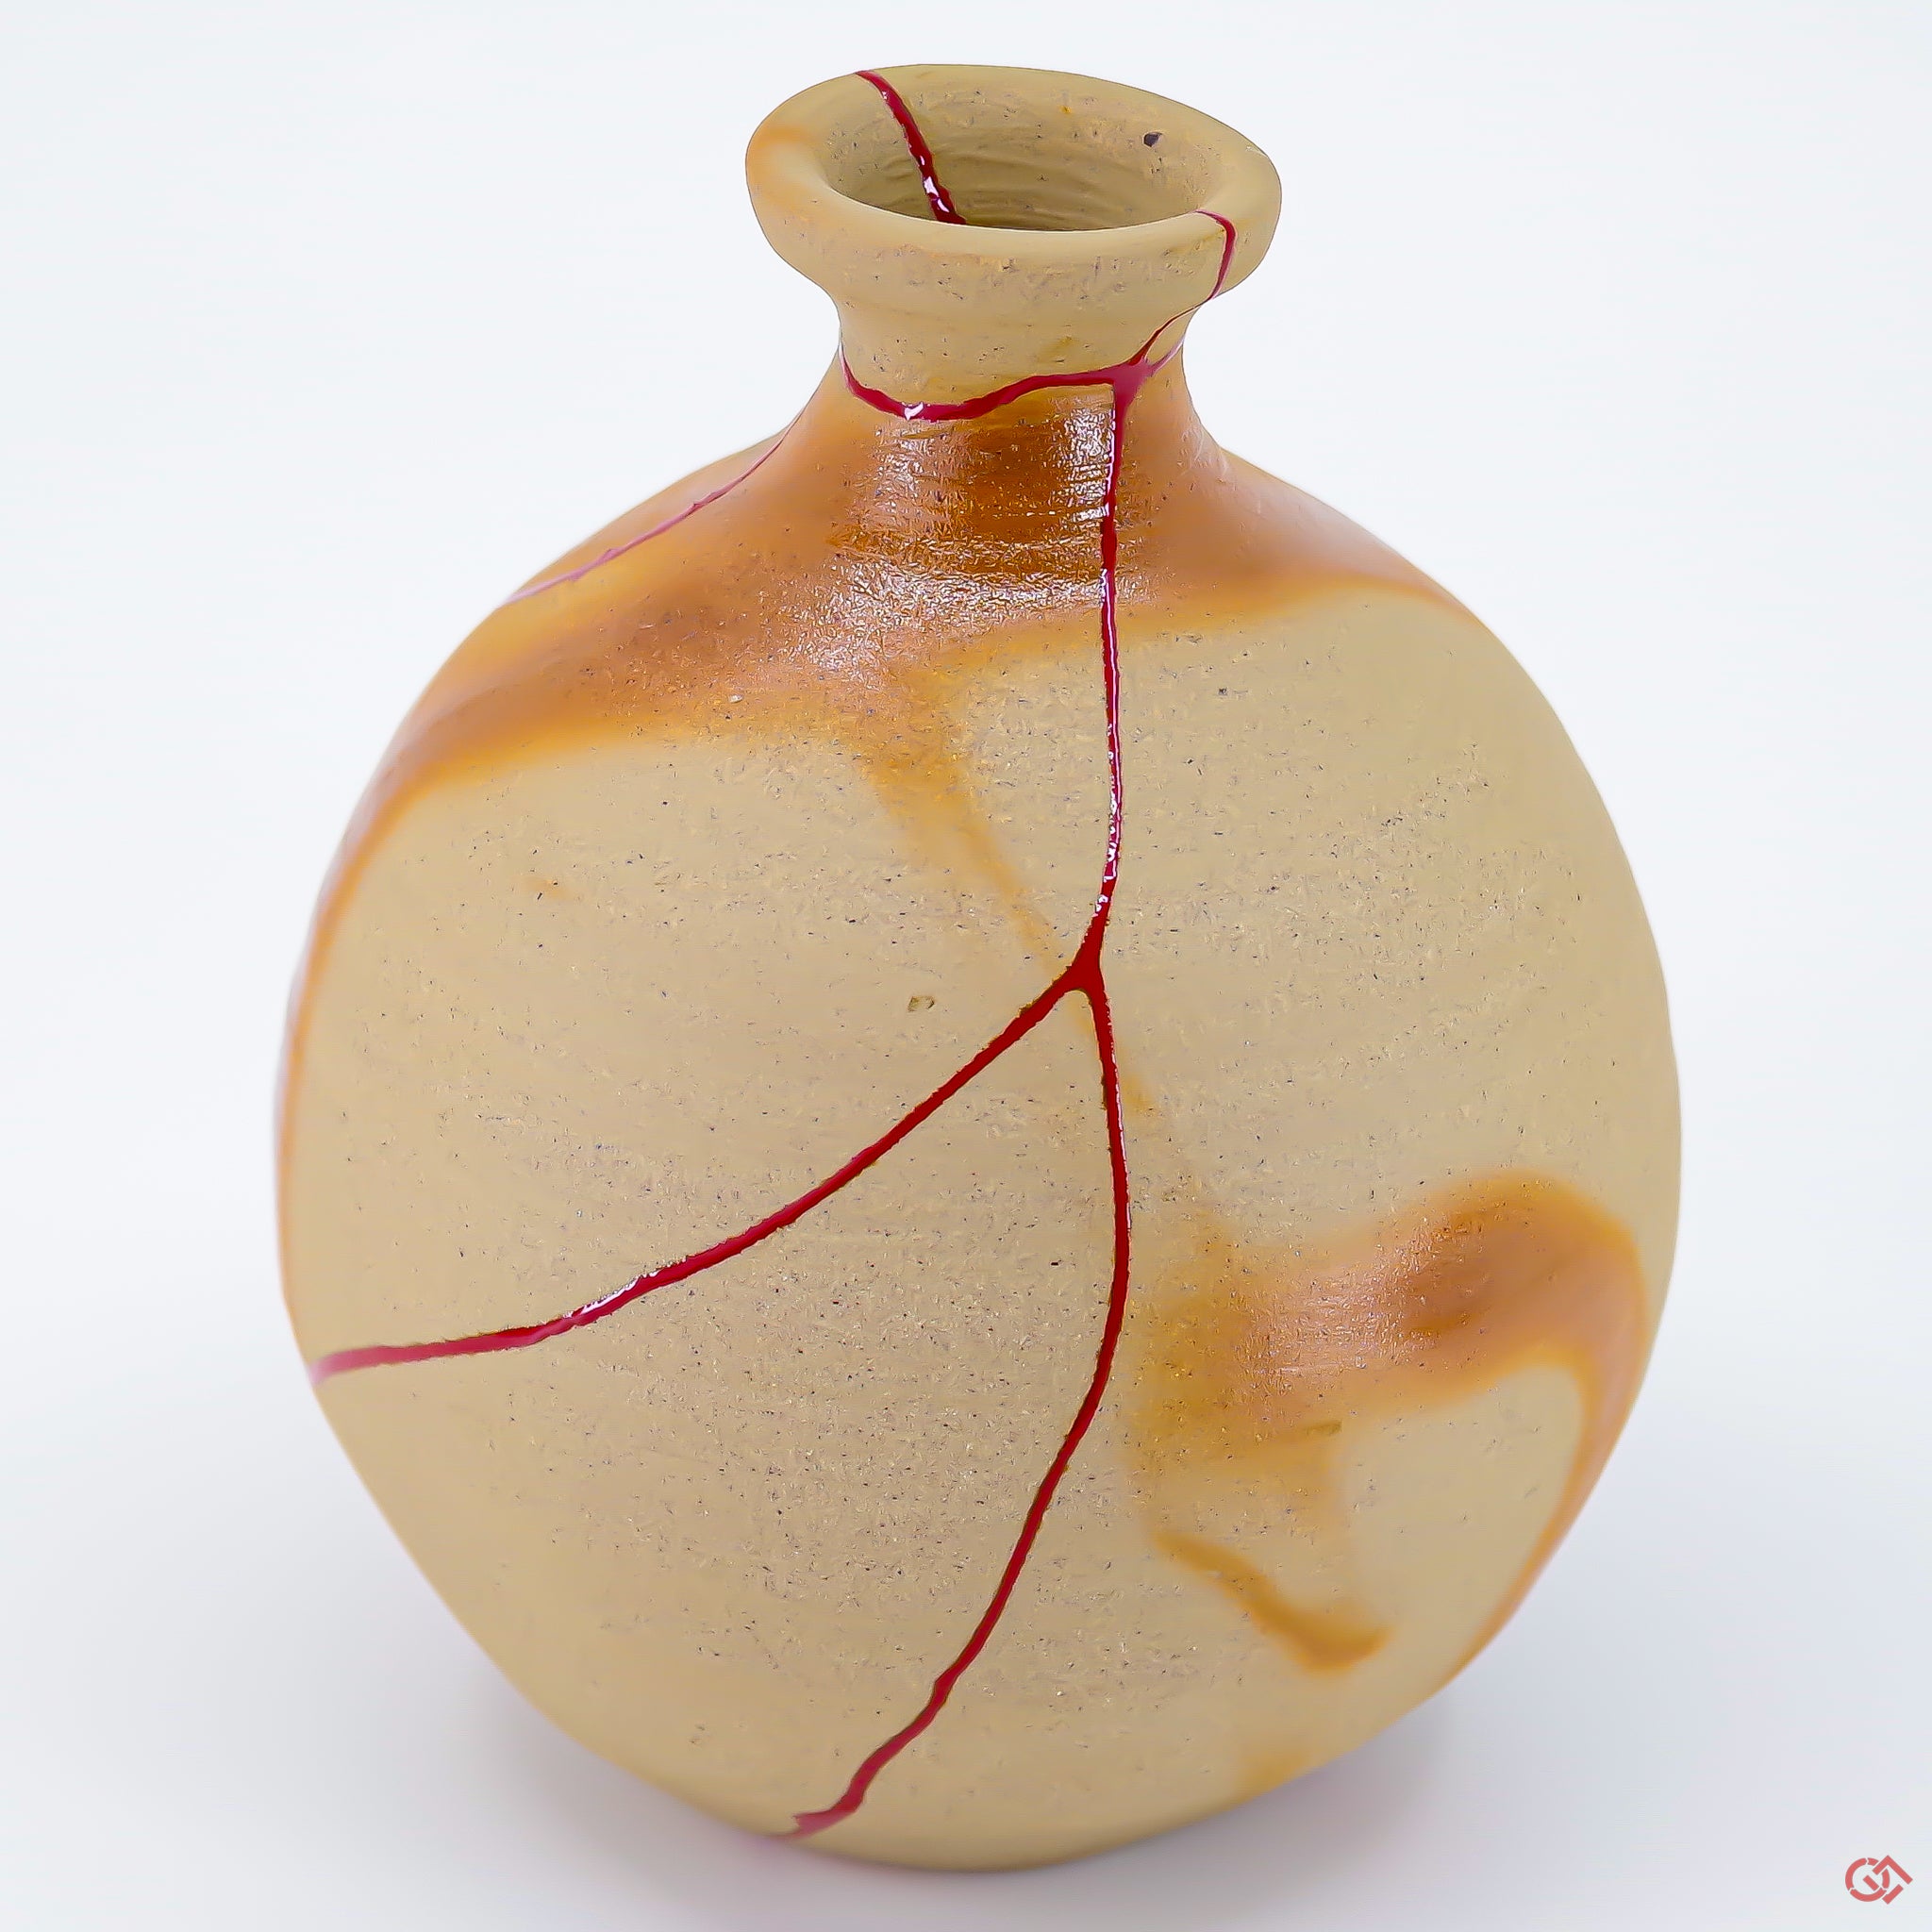 A close-up photo of an authentic Kintsugi pottery piece, showing the detail of its repairs and artisty.